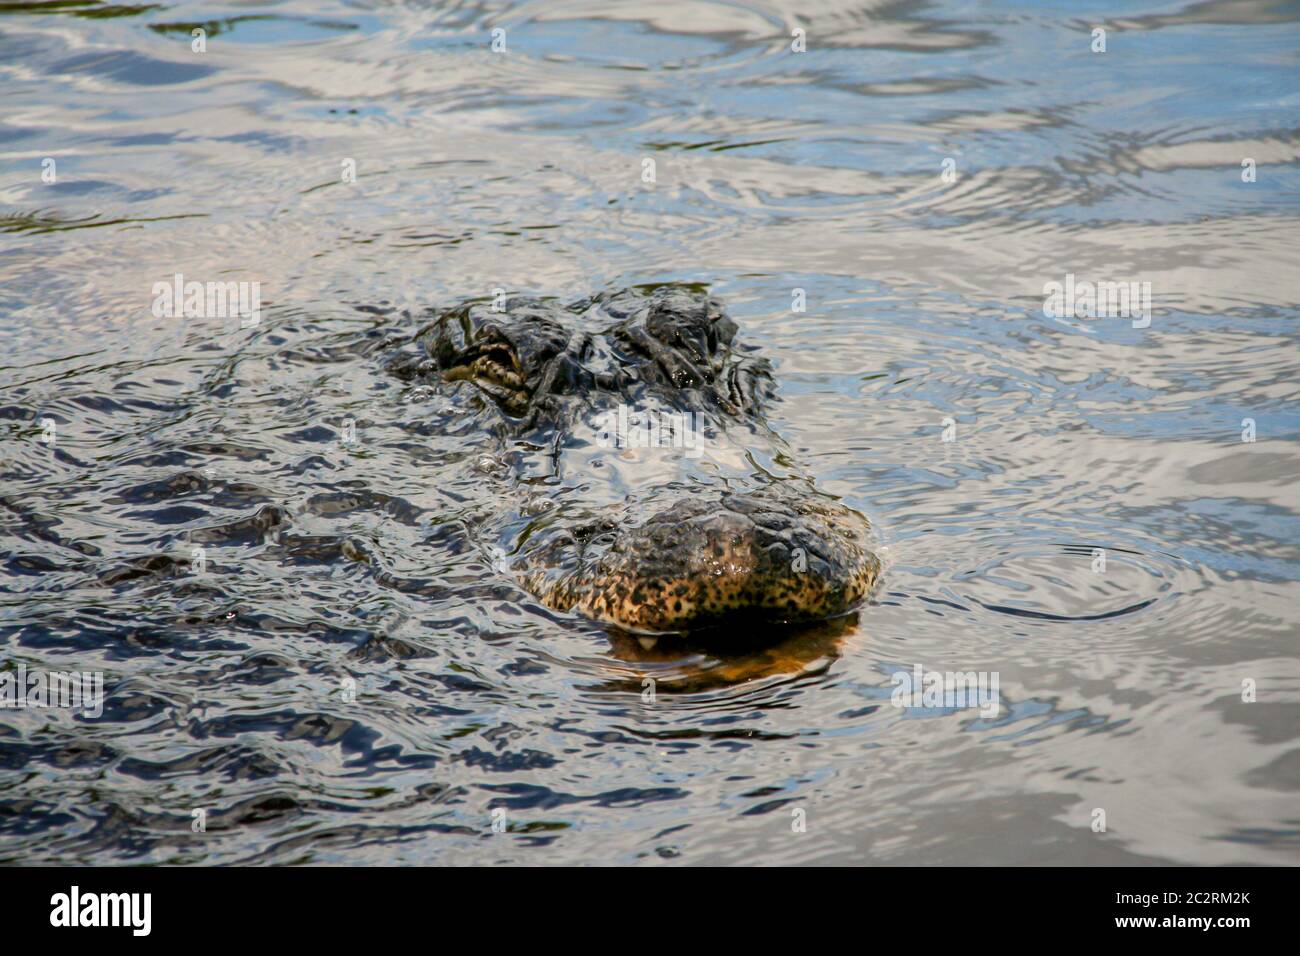 The head of an aligator in Florida's Everglades looks out of the water Stock Photo